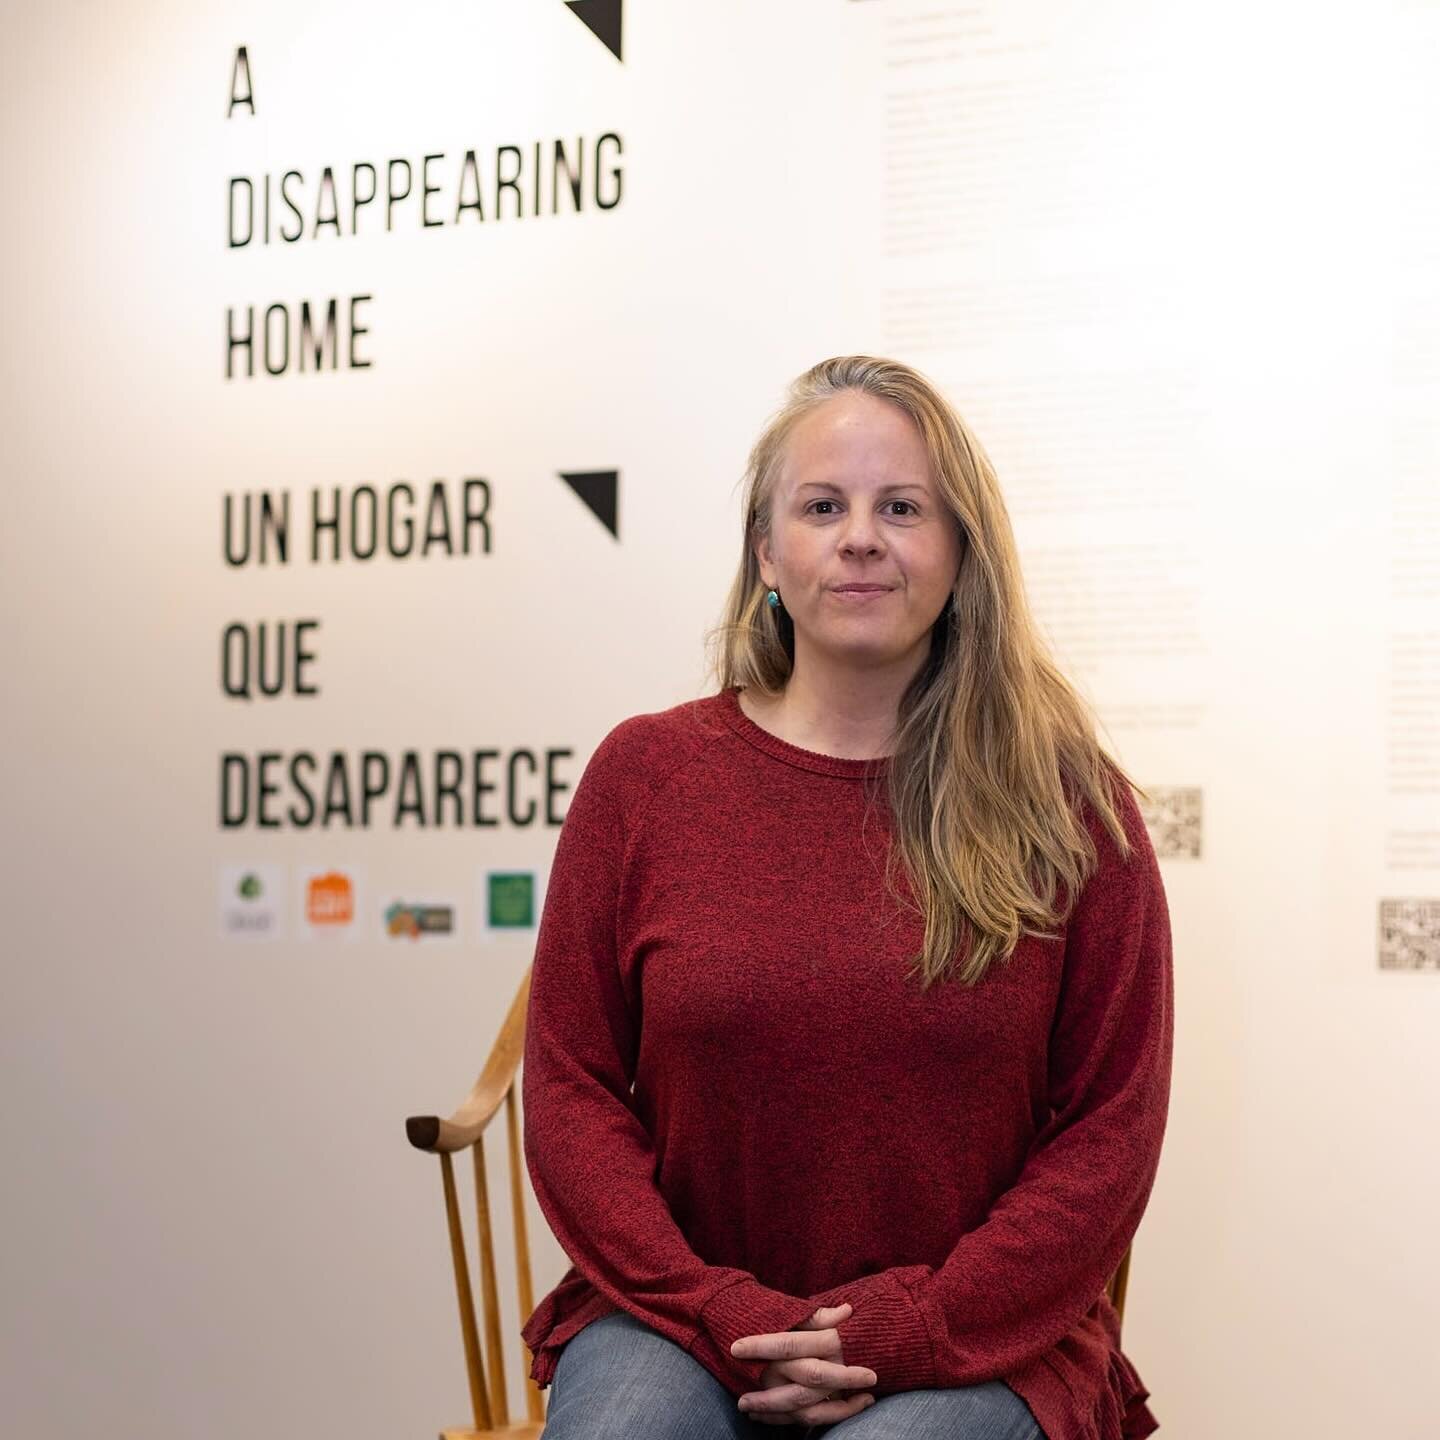 Today is the last day to go check out the exhibit of &ldquo;A Disappearing Home&rdquo; at @tetoncountylibrary . Exhibit ends at 6pm today. Photo by @jsack_foto 

Thank you #jackson for all of the emails and messages of support as well as everyone who